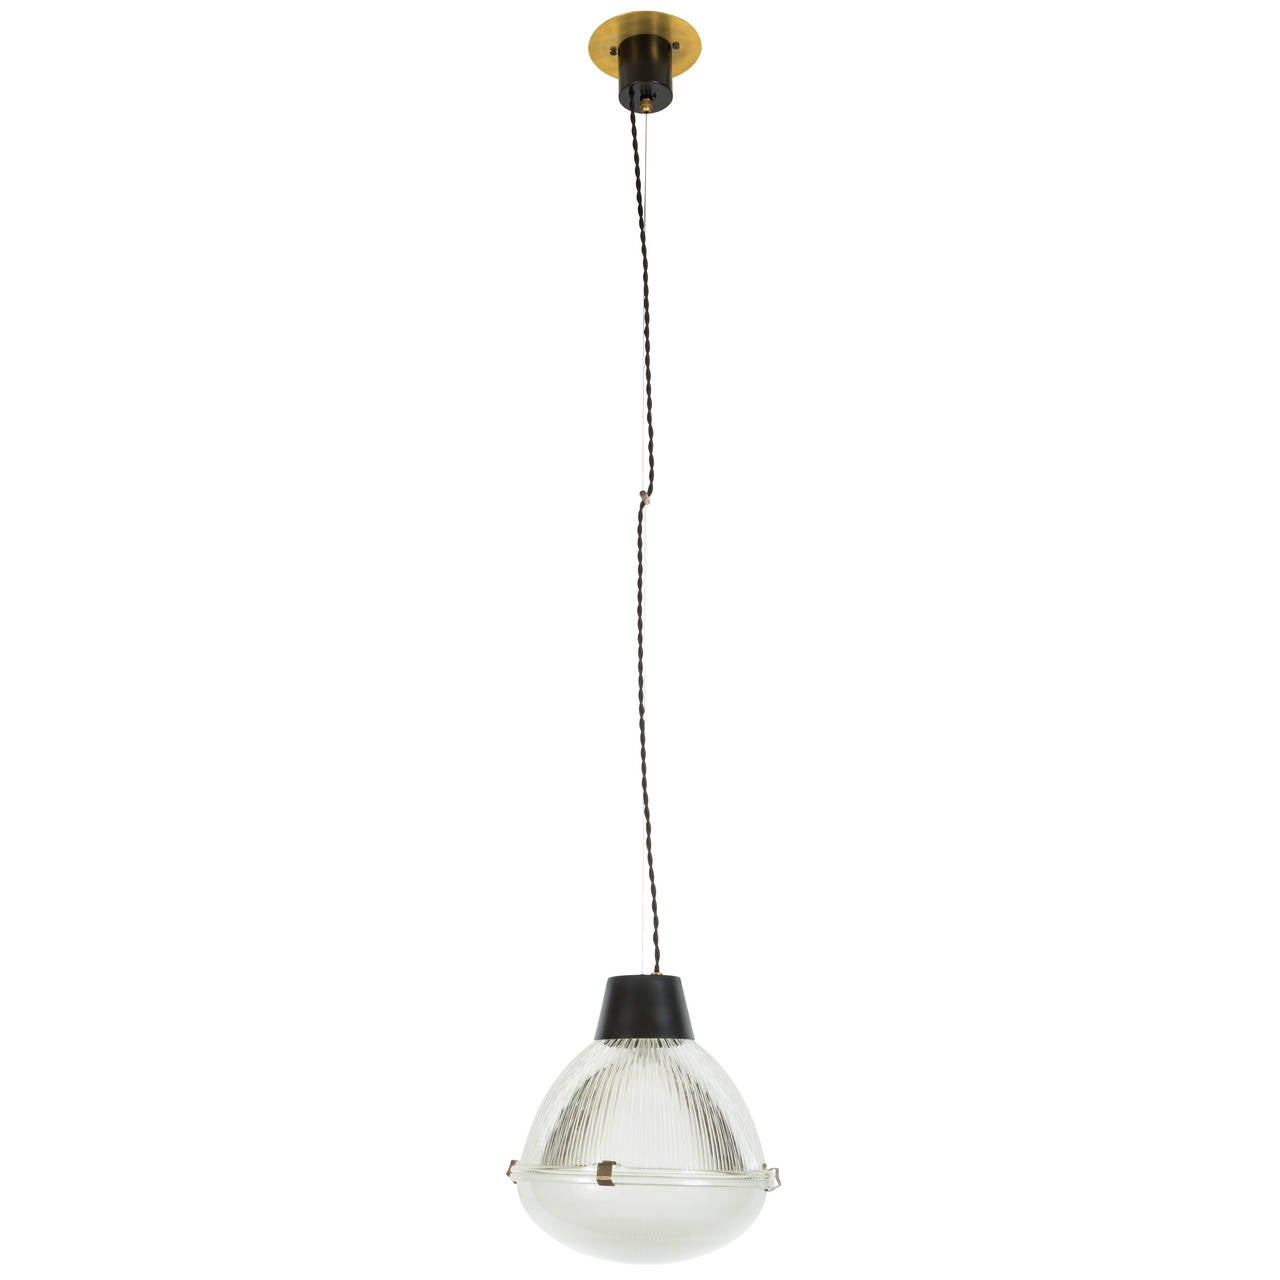 1960s Ignazio Gardella Pendant for Azucena. Executed in black metal, brass and pressed glass. A singular design of incomparable sophistication and refinement. 

Measurements for lamp body. Drop can be adjusted to desired height (50+ inches of